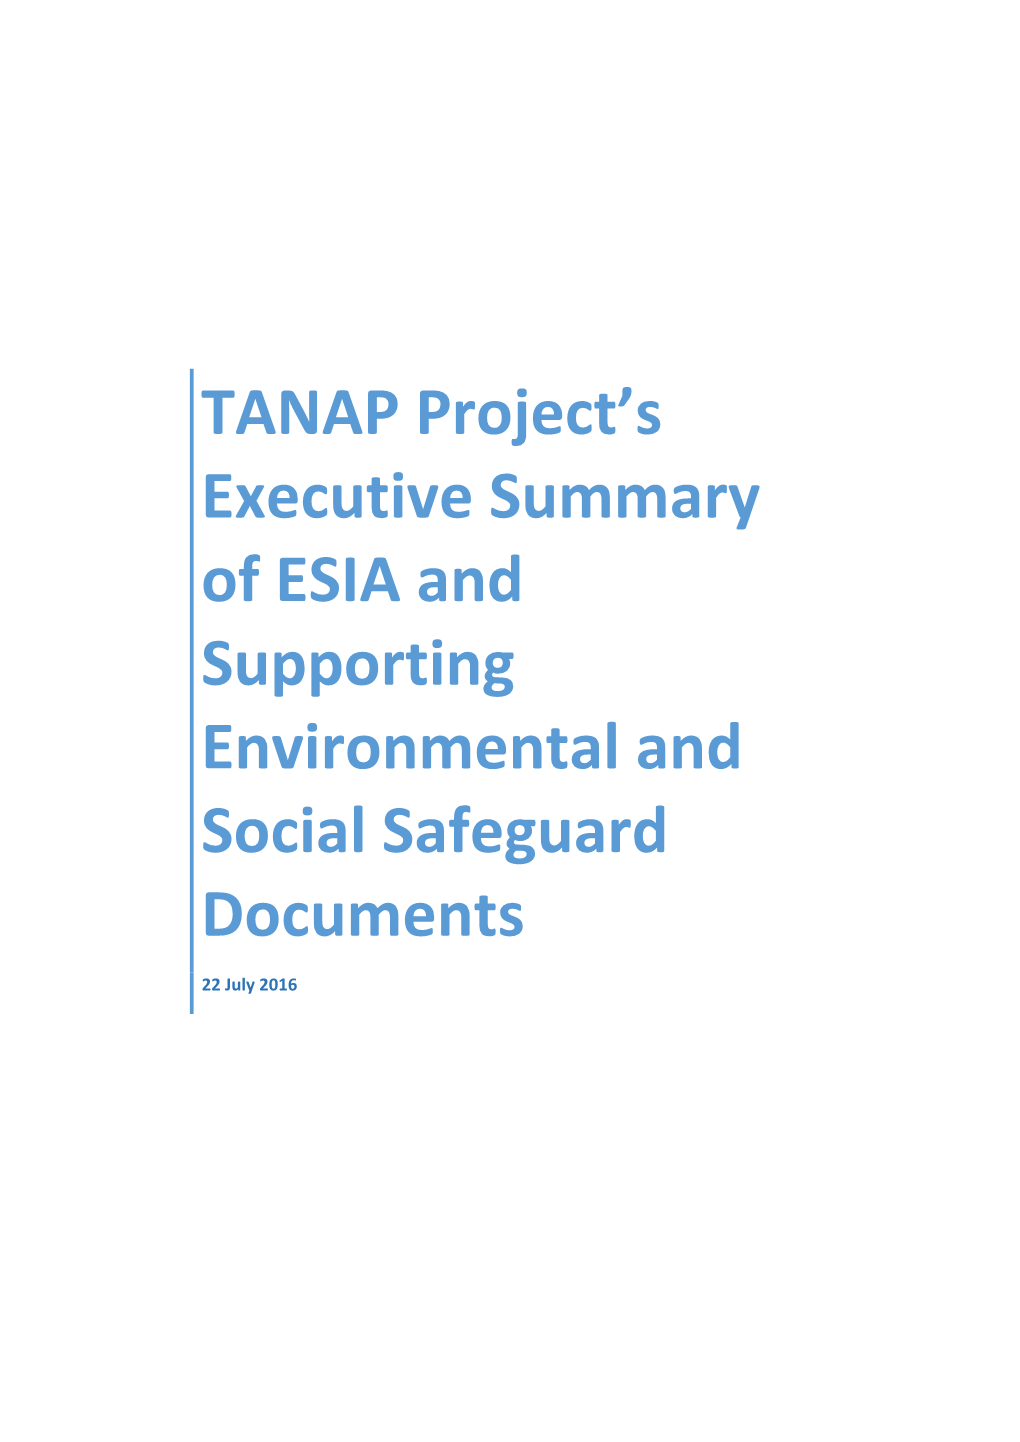 TANAP Project's Executive Summary of ESIA and Supporting Environmental and Social Safeguard Documents